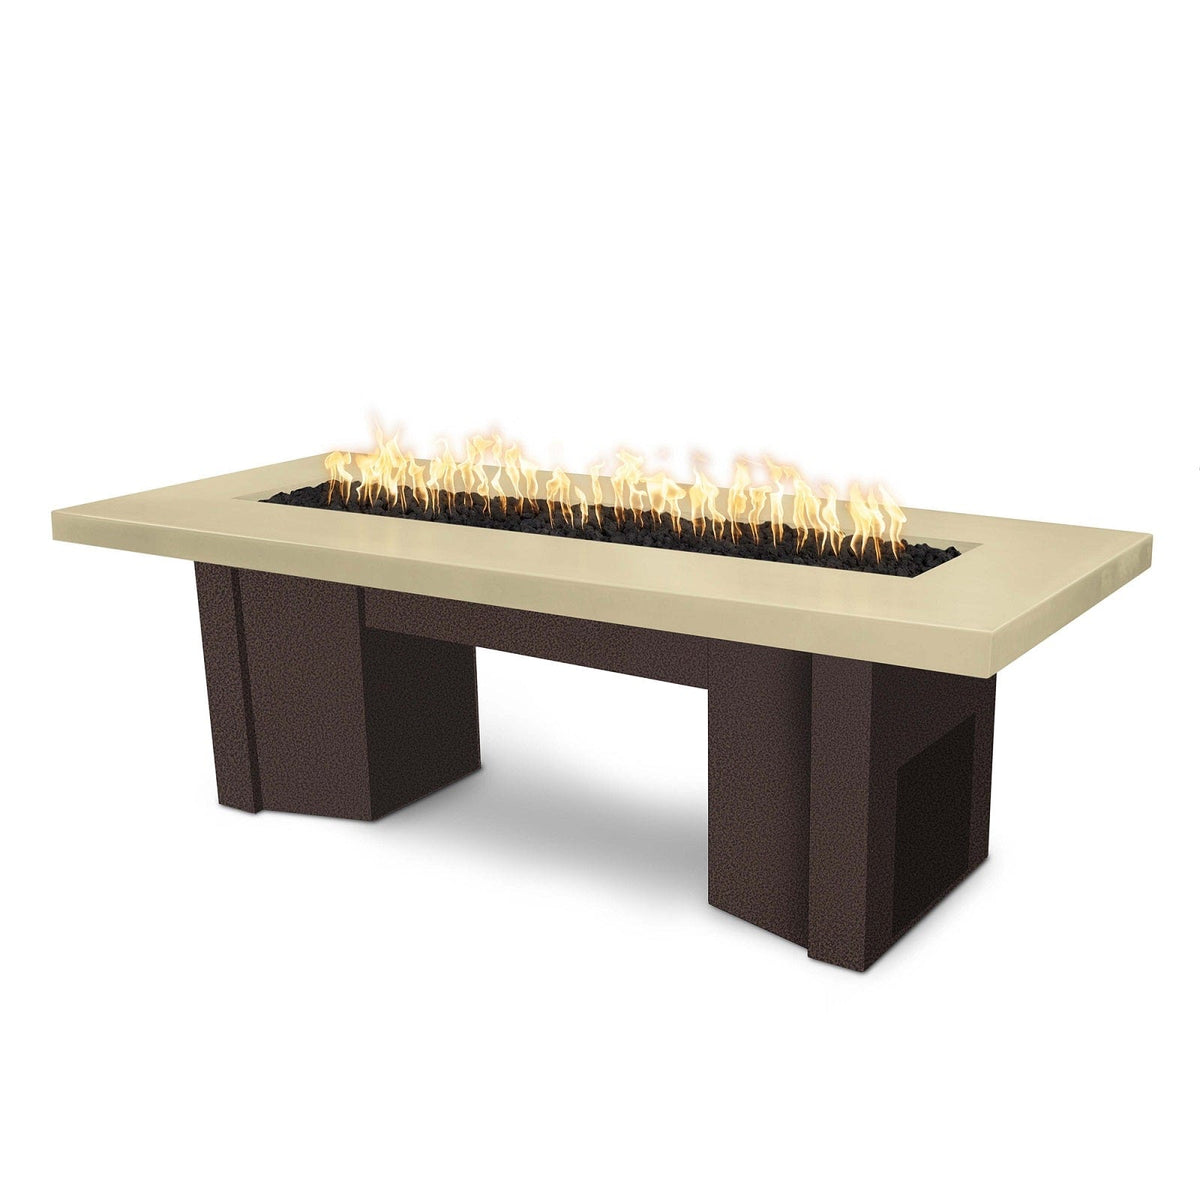 The Outdoor Plus Fire Features Vanilla (-VAN) / Copper Vein Powder Coated Steel (-CPV) The Outdoor Plus 60&quot; Alameda Fire Table Smooth Concrete in Liquid Propane - Flame Sense System with Push Button Spark Igniter / OPT-ALMGFRC60FSEN-LP